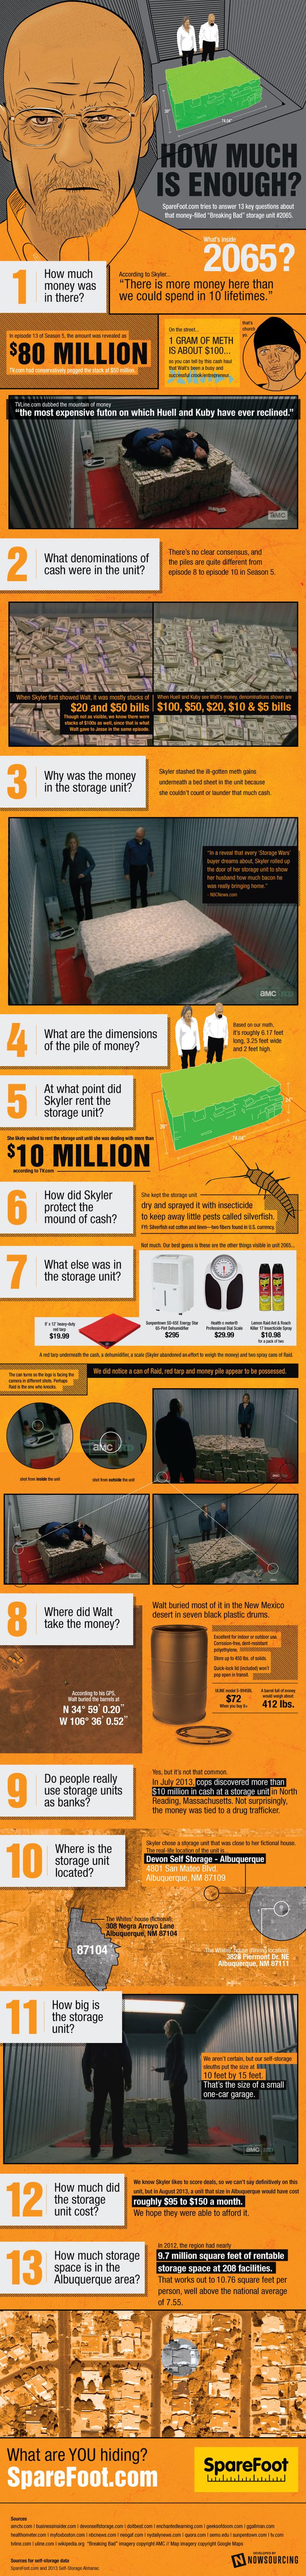 How Much is Enough? (Breaking Bad Storage Unit)